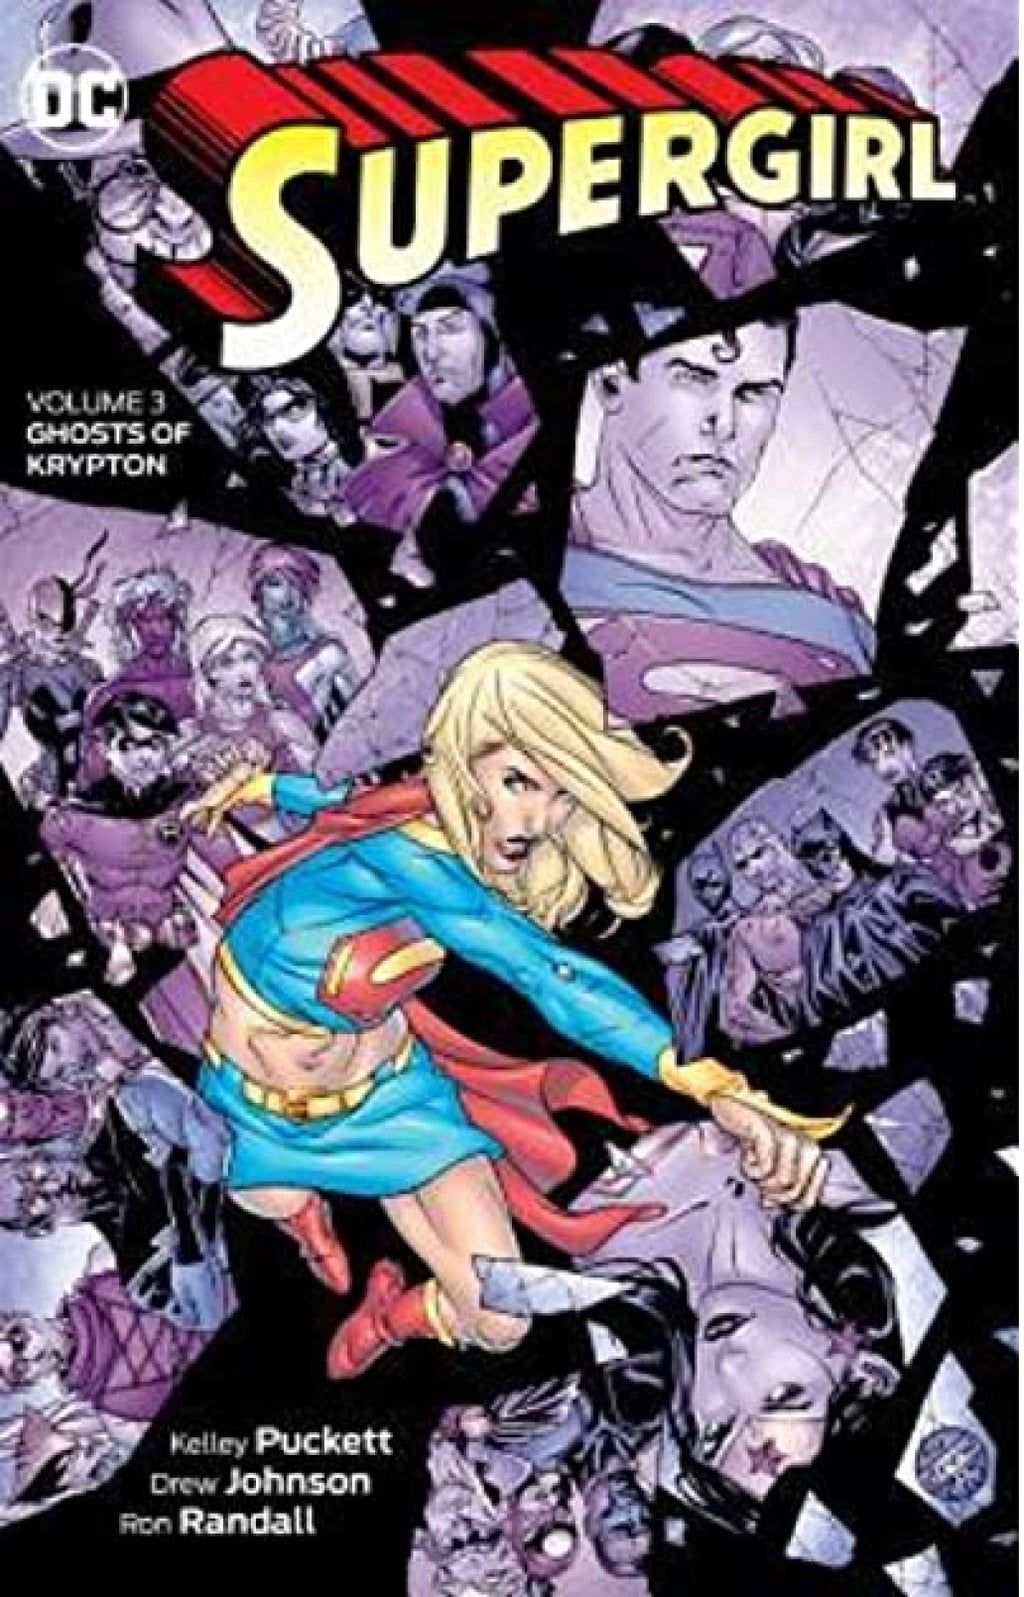 Supergirl Volume 3 Ghosts Of Krypton - The Comic Warehouse